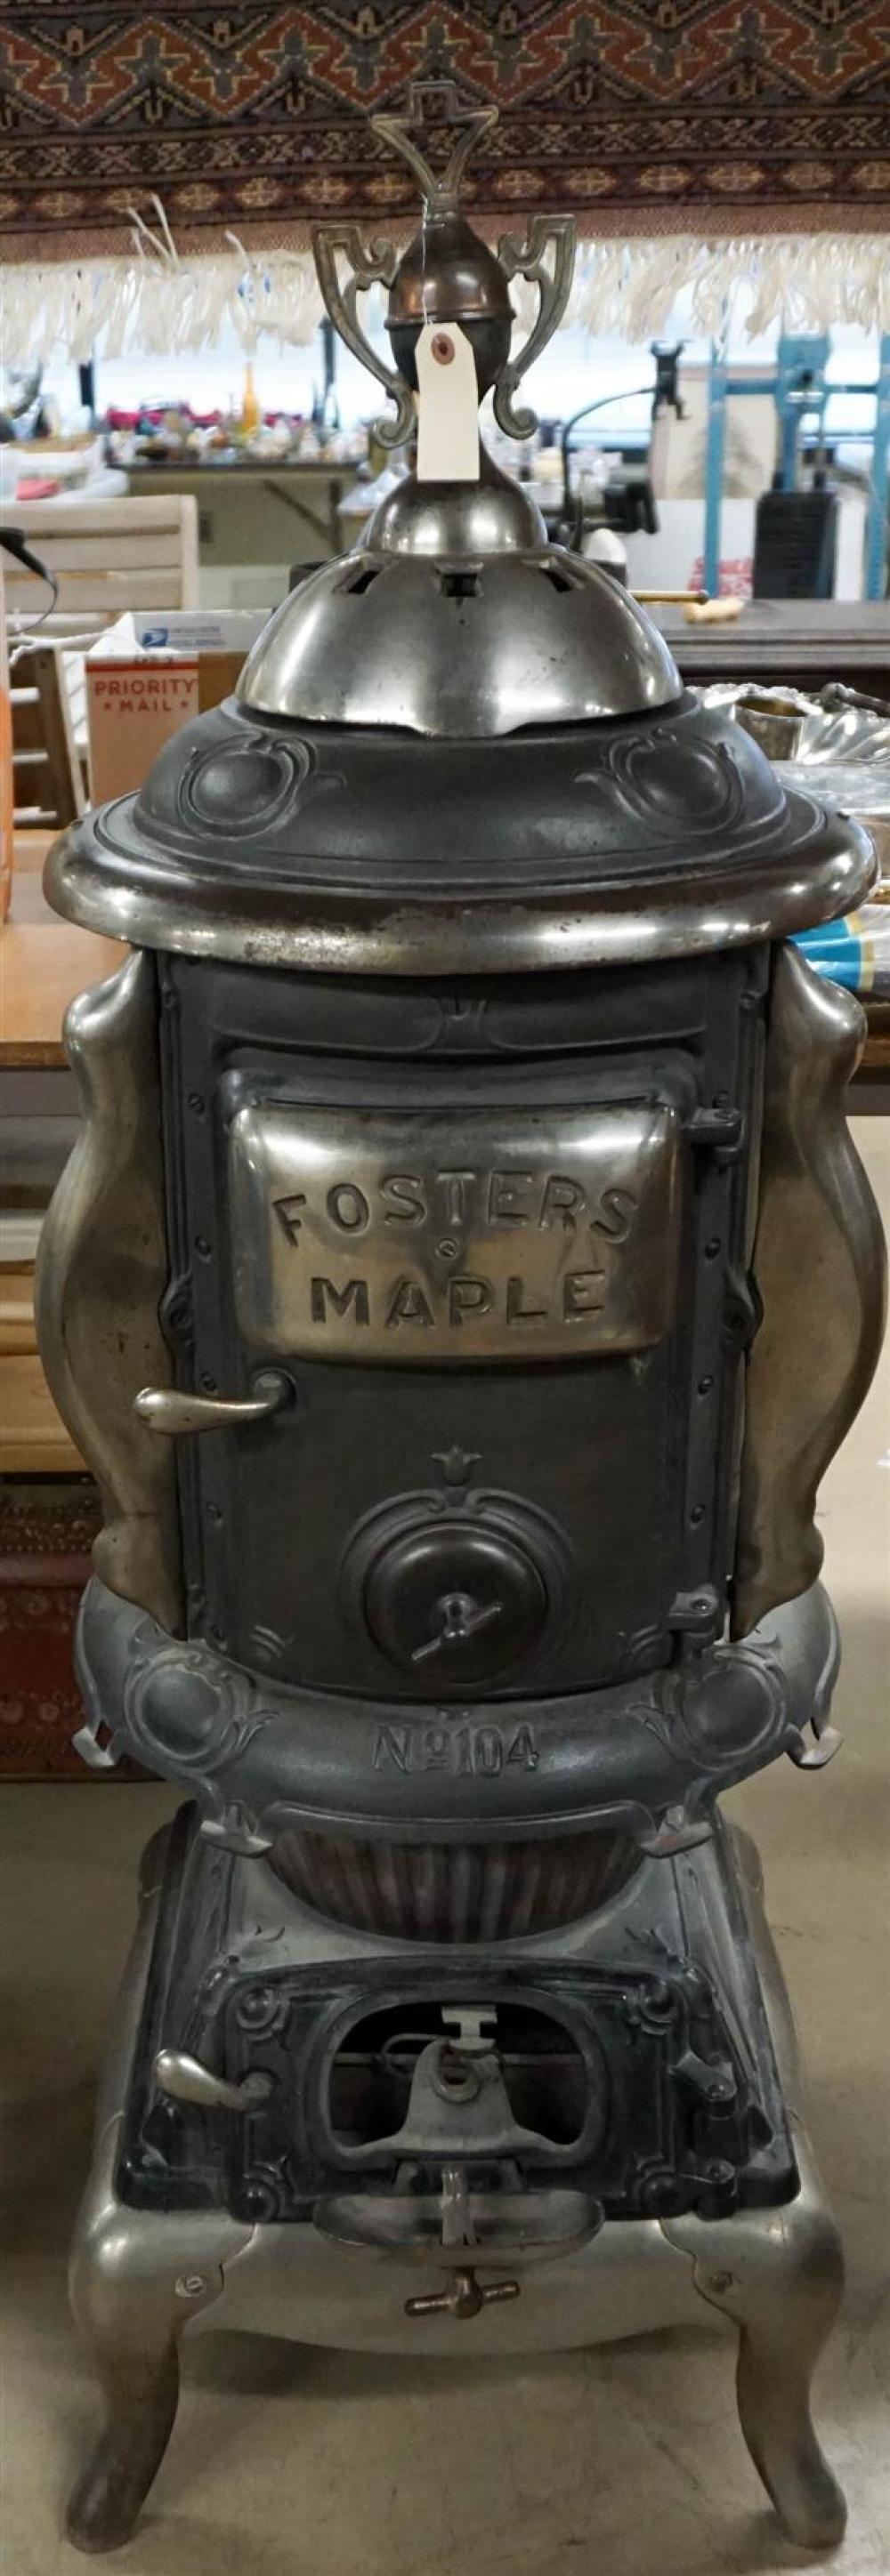 FOSTERS MAPLE NO 104 CHROME PLATED 322ea9